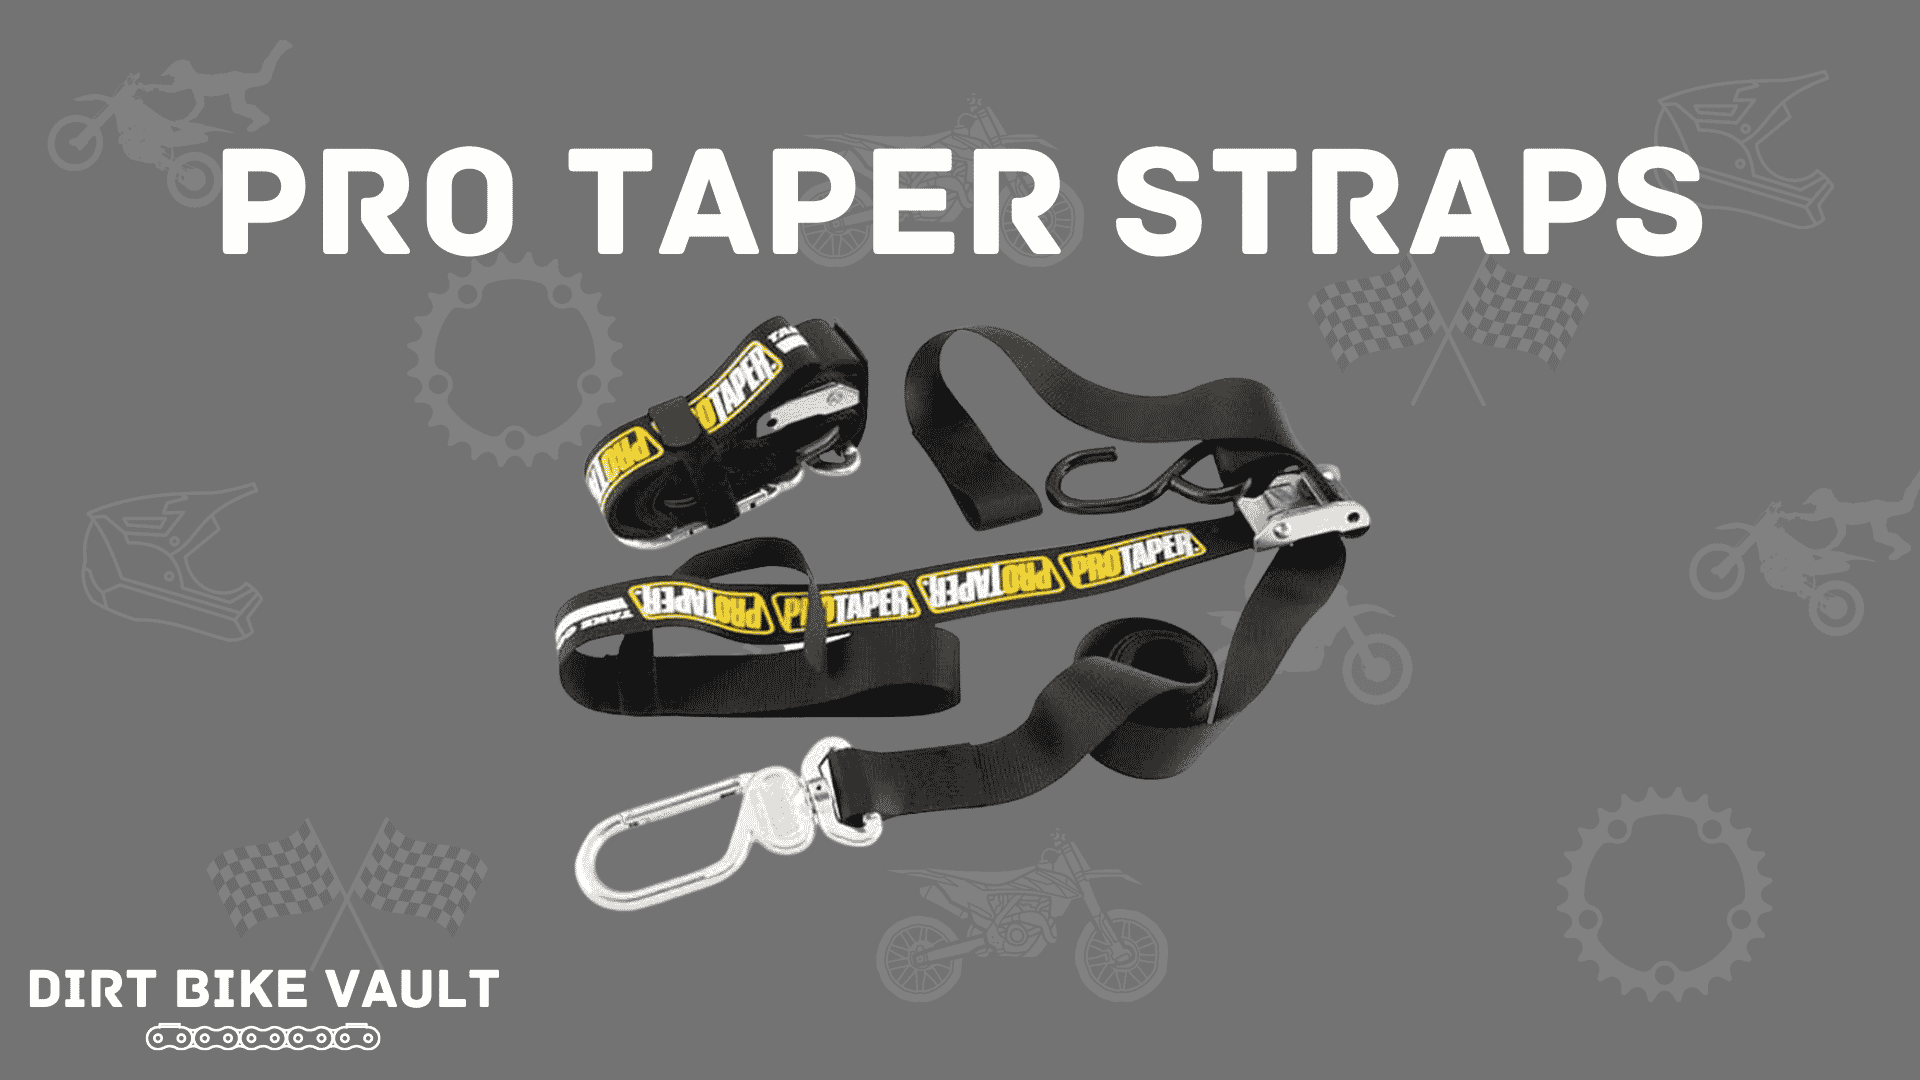 Pro Taper straps in white text on gray background with image of Pro Taper tie downs